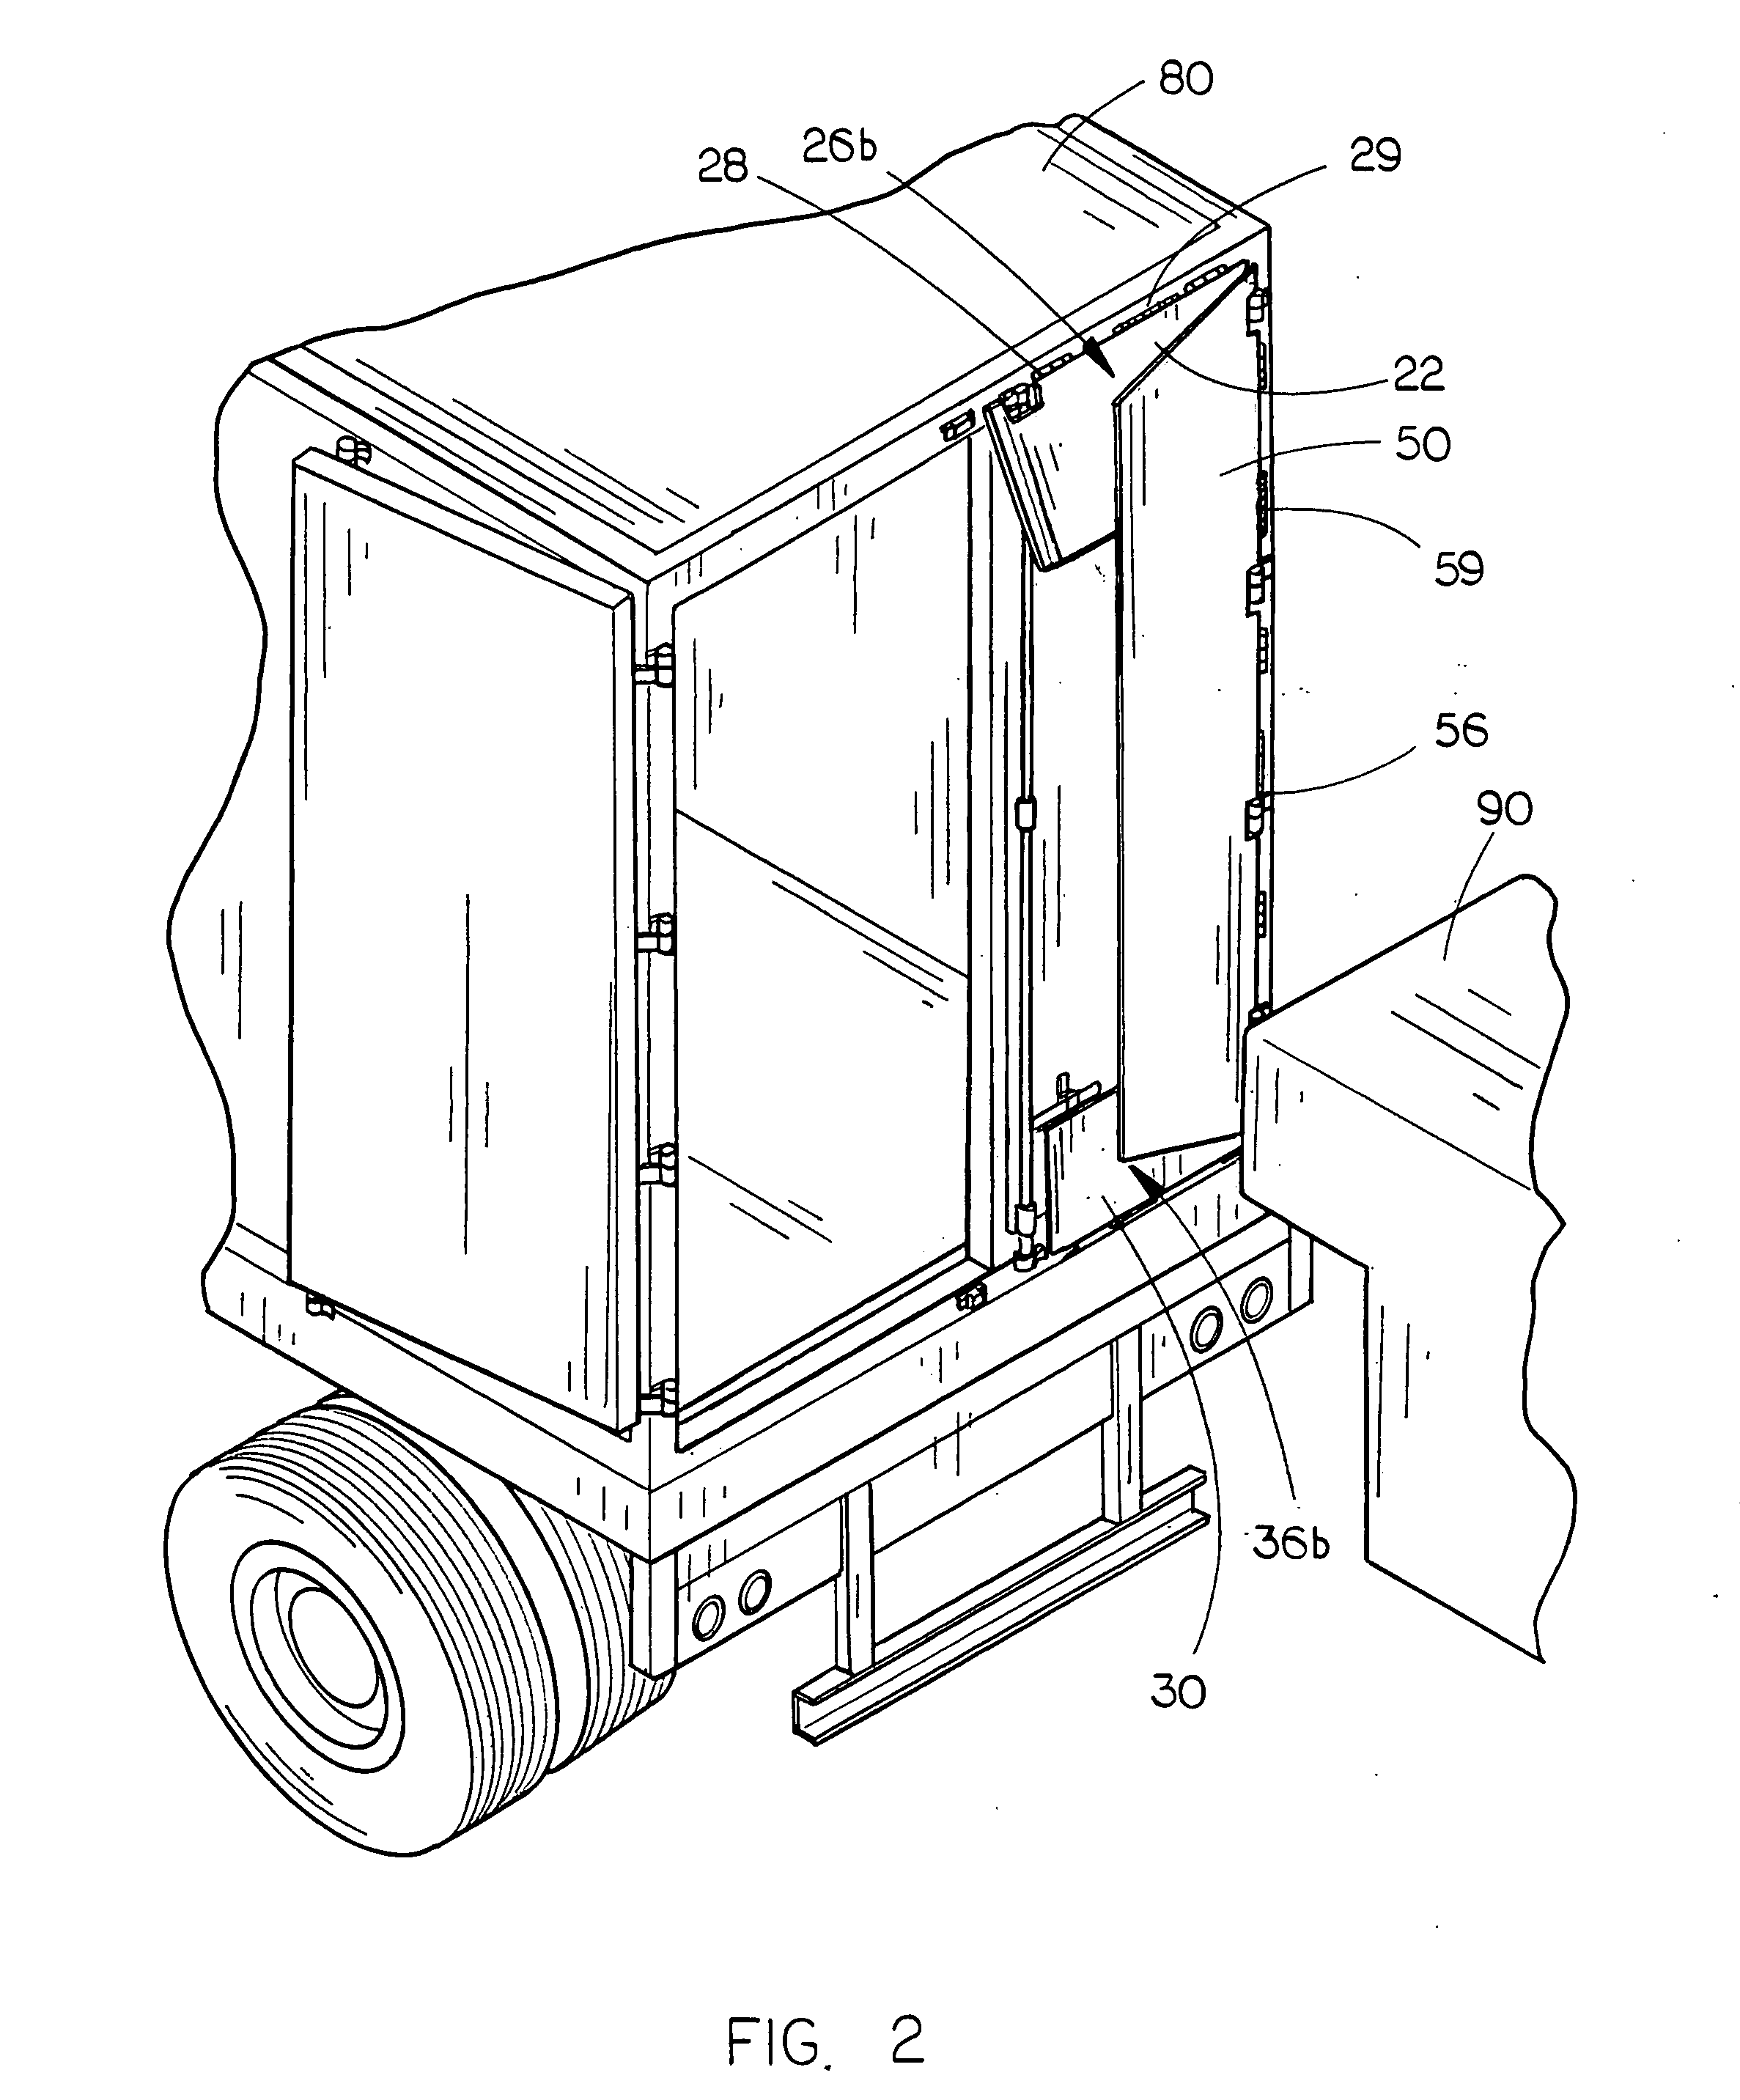 Air drag reduction apparatus for tractor-trailers